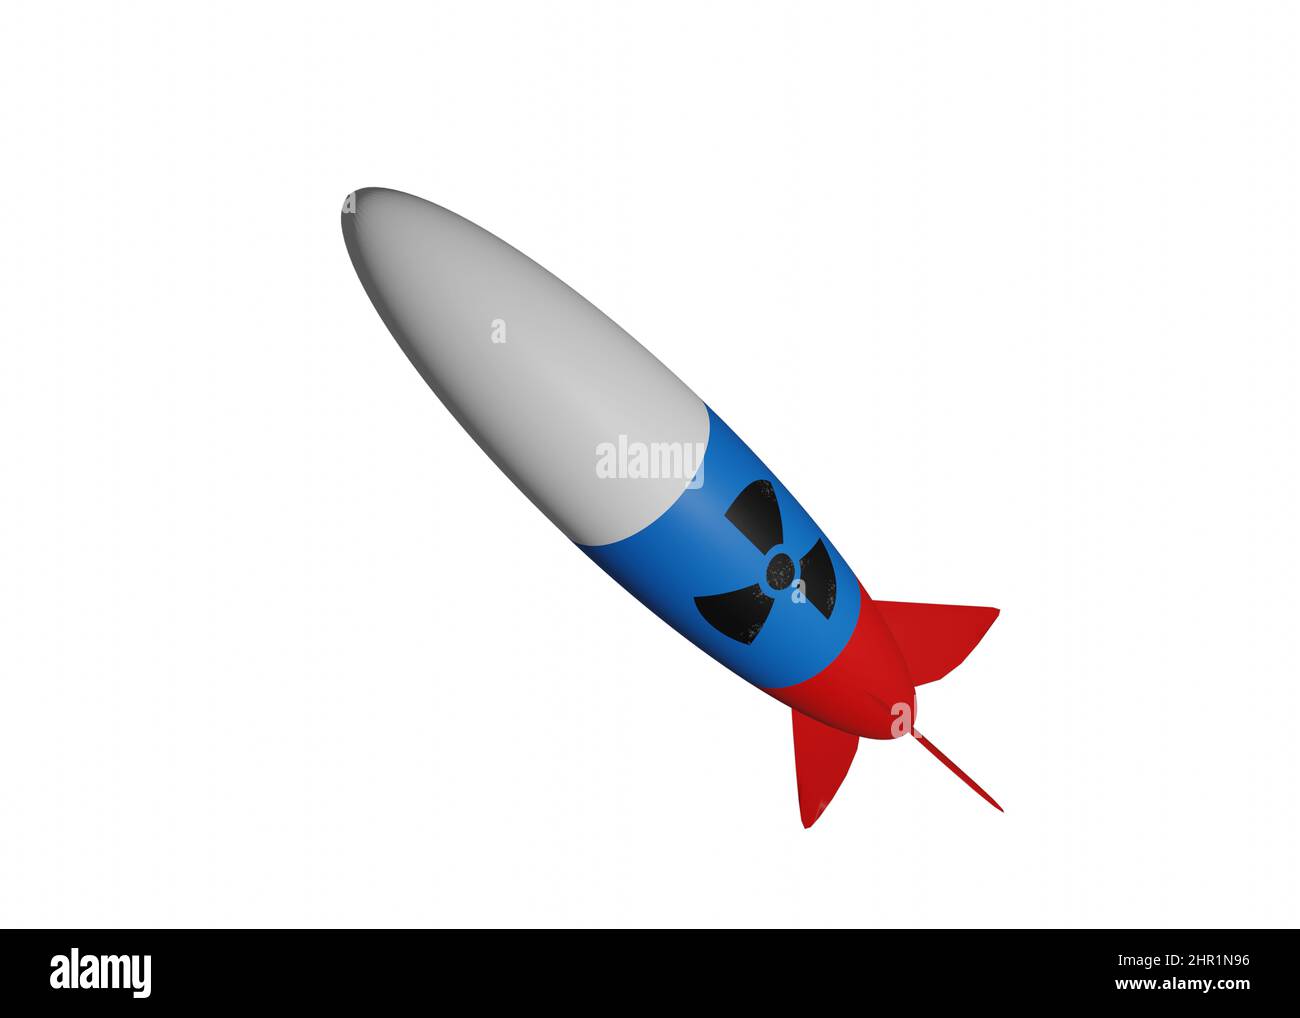 Rocket with russian flag paint and nuclear danger sign. Russian Nuclear weapon abstract concept, 3D rendered illustration. Stock Photo